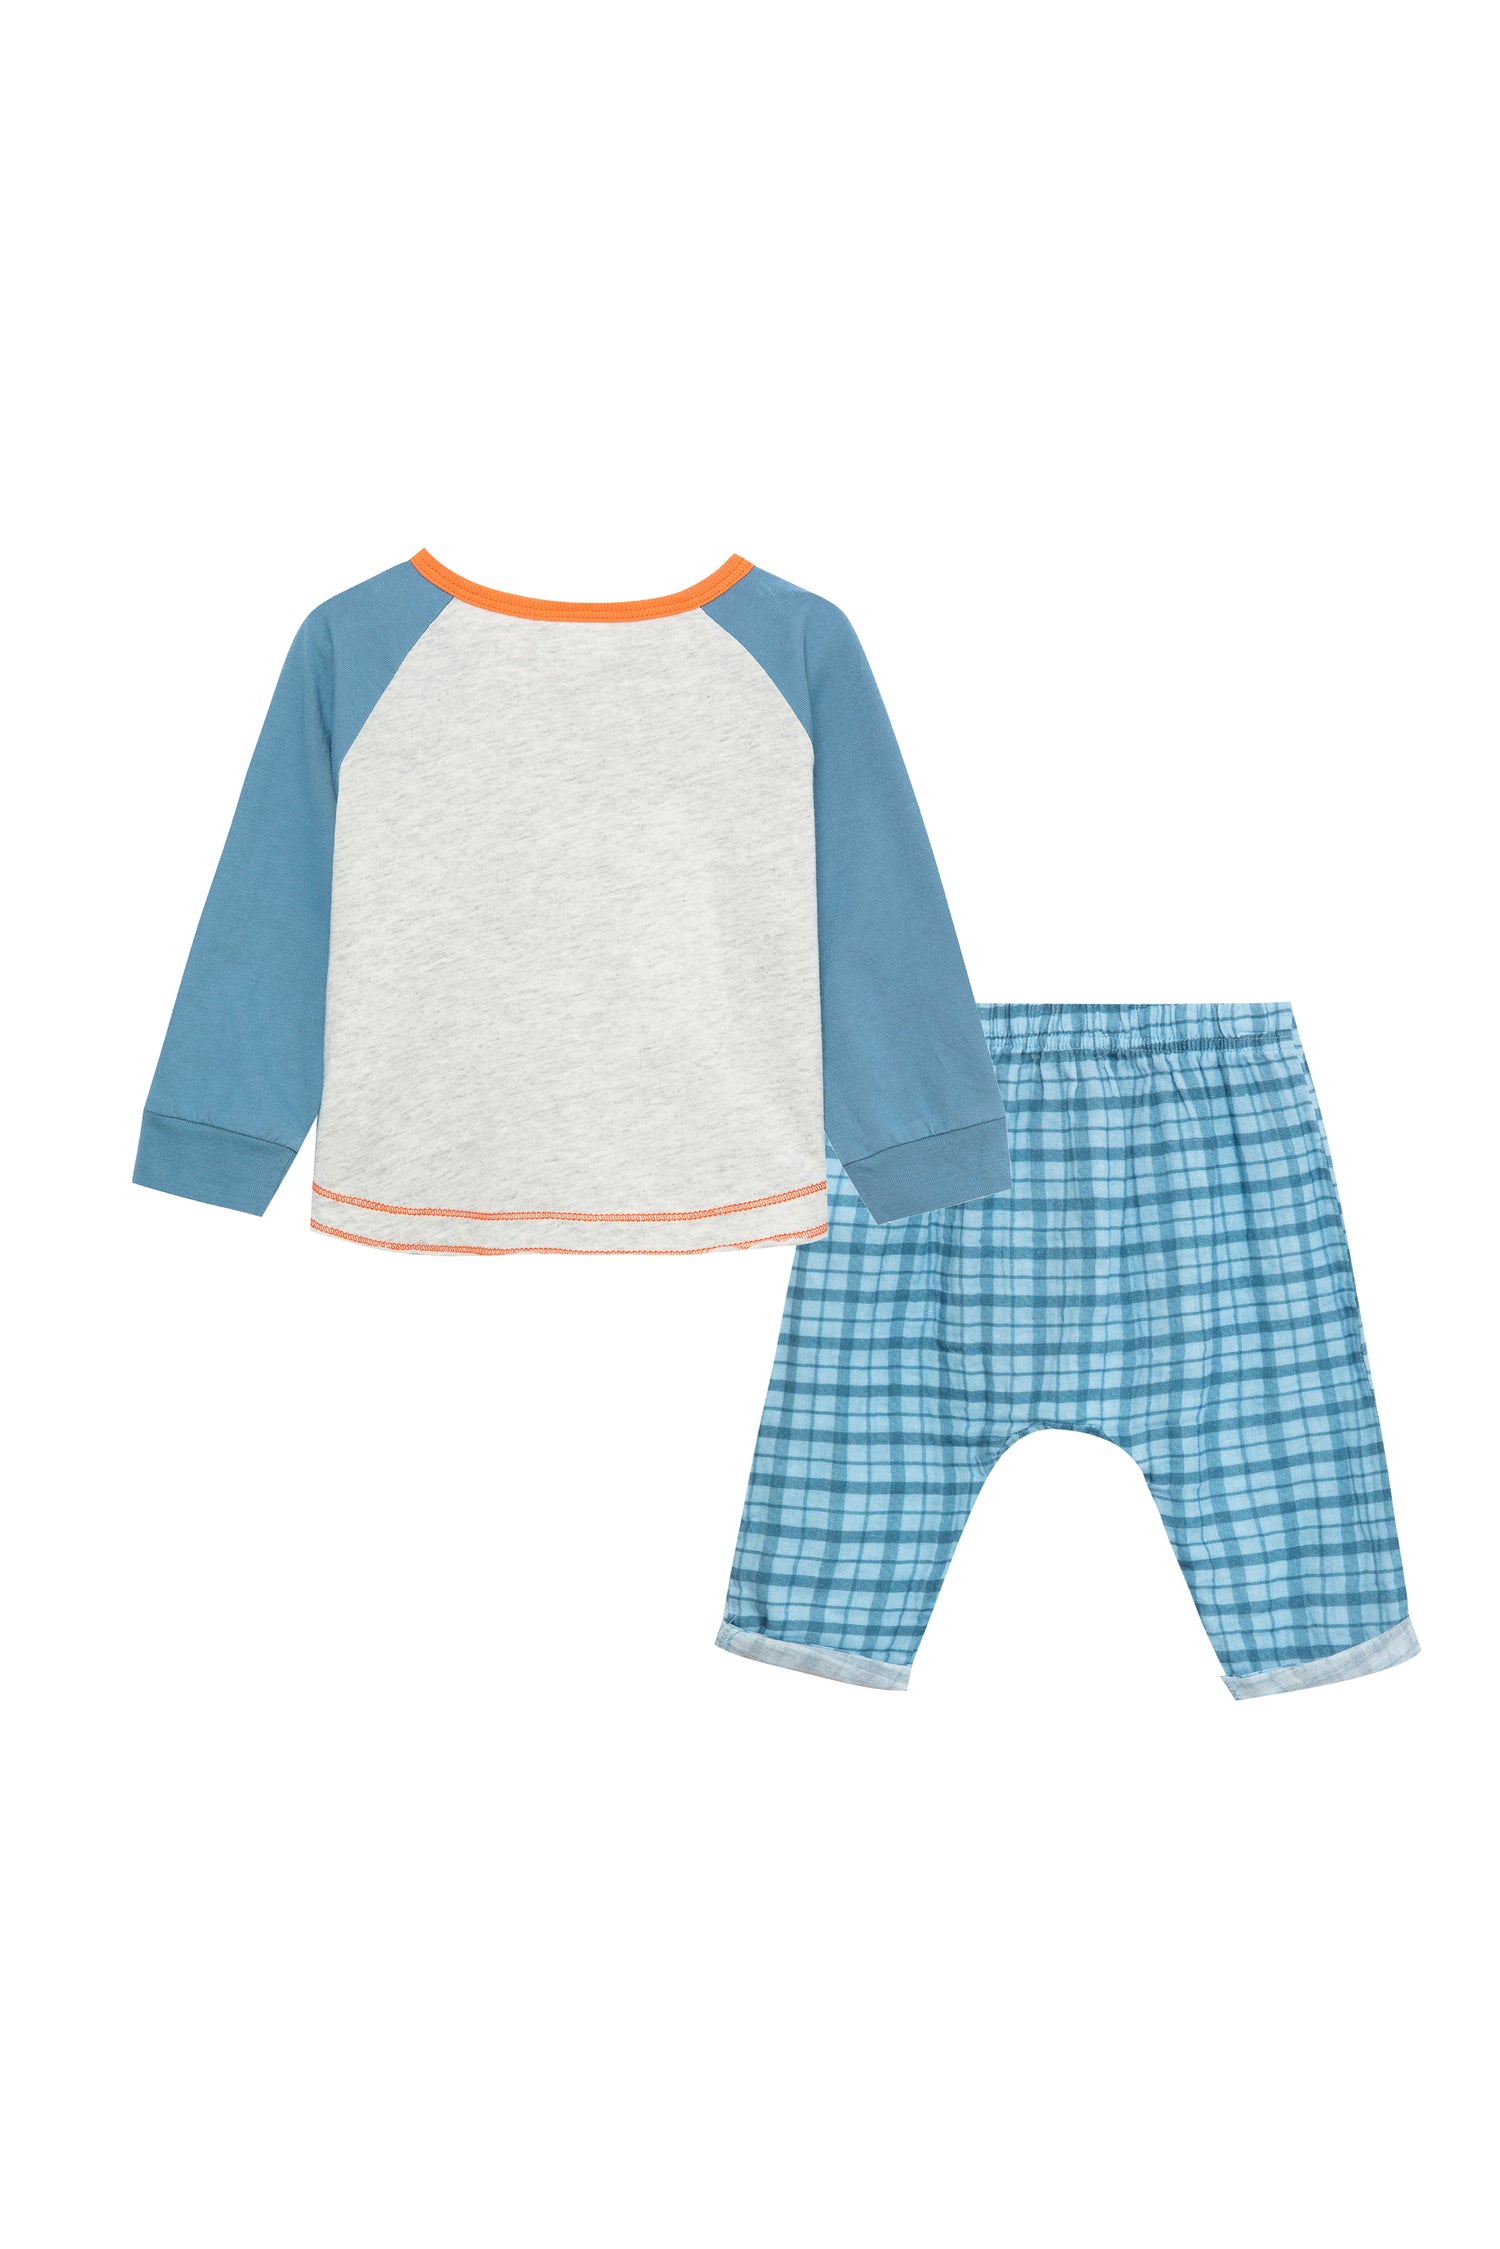 Back view of two piece set with blue and grey long sleeve top and blue plaid shorts